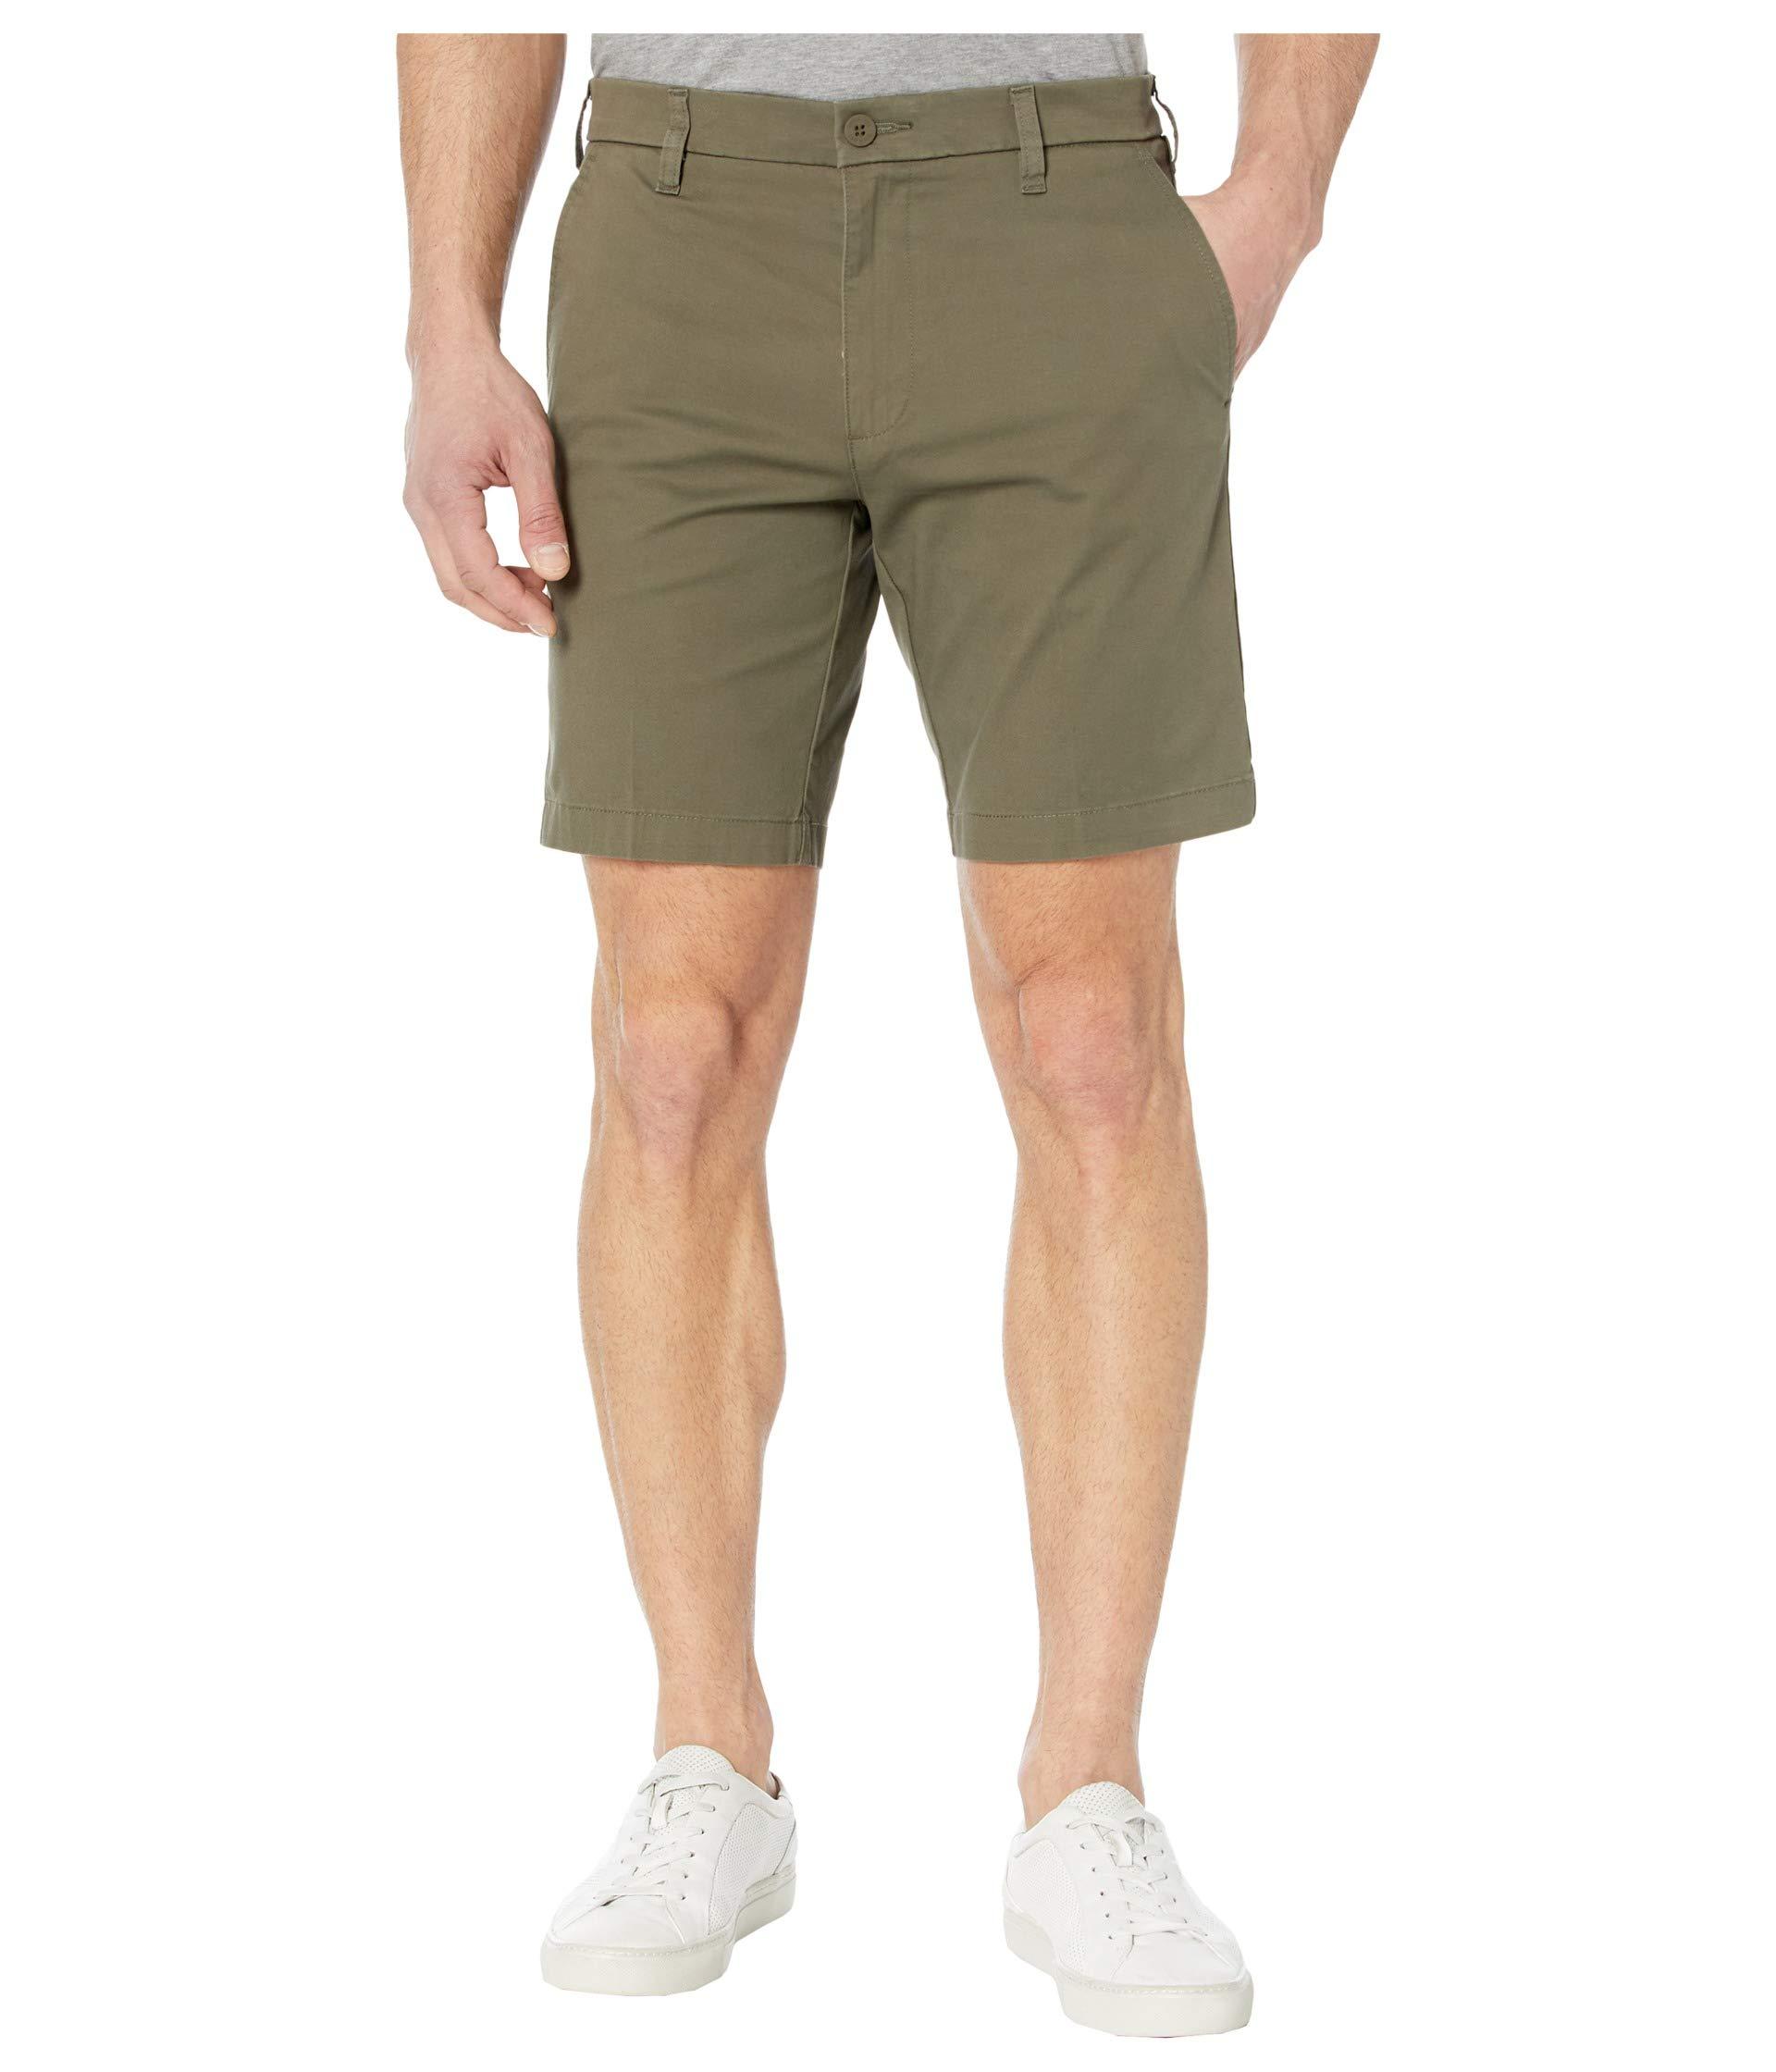 Dockers Cotton Supreme Flex Ultimate Shorts in Green for Men - Lyst